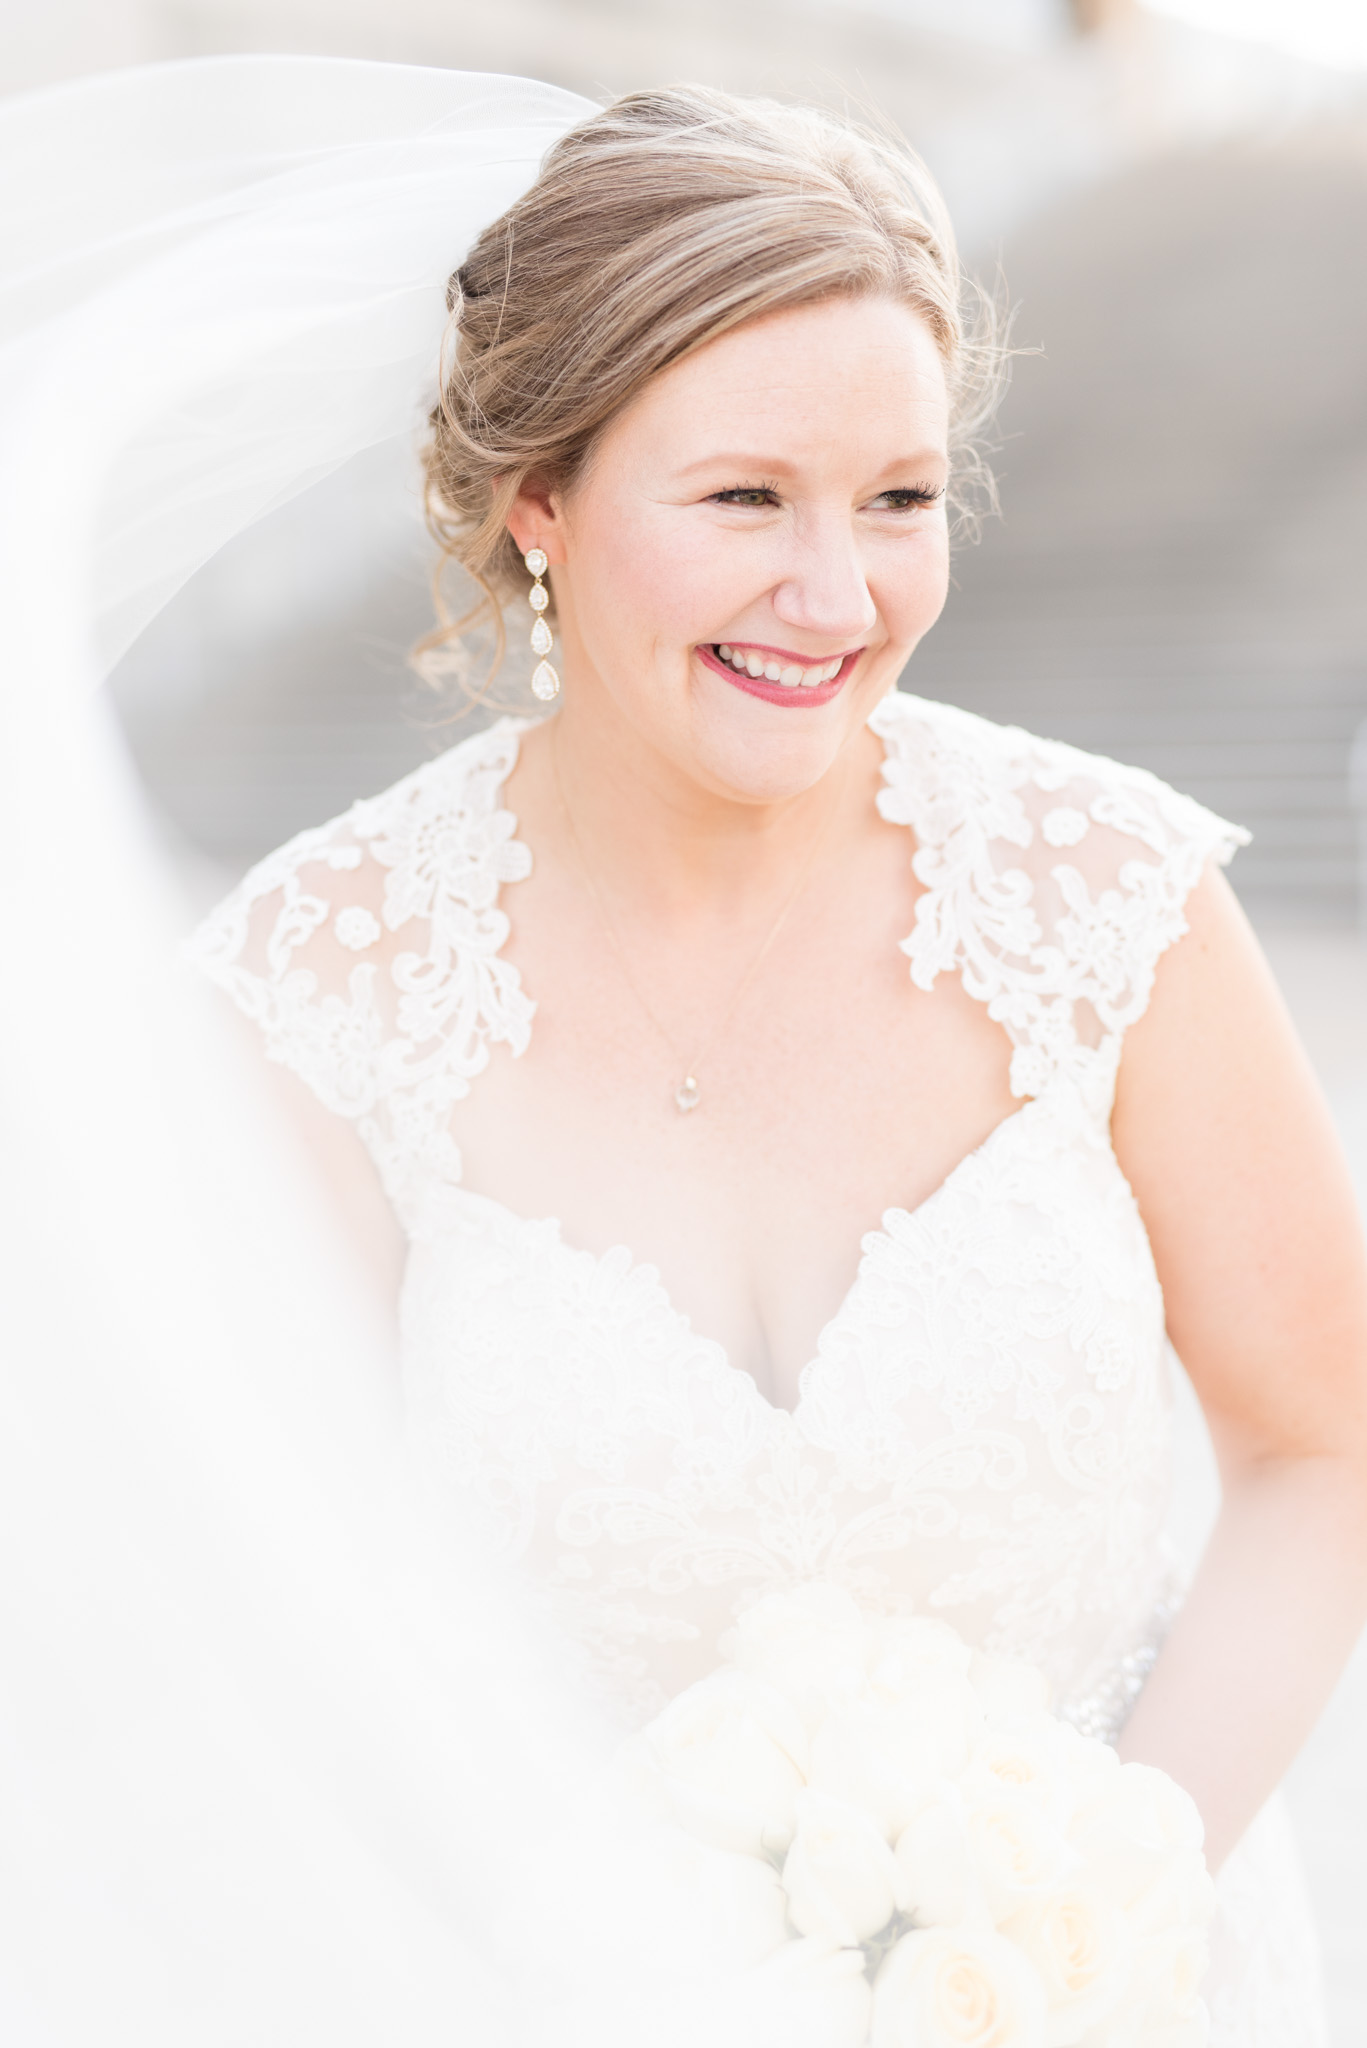 Bride looks to the side and laughs while veil blows.